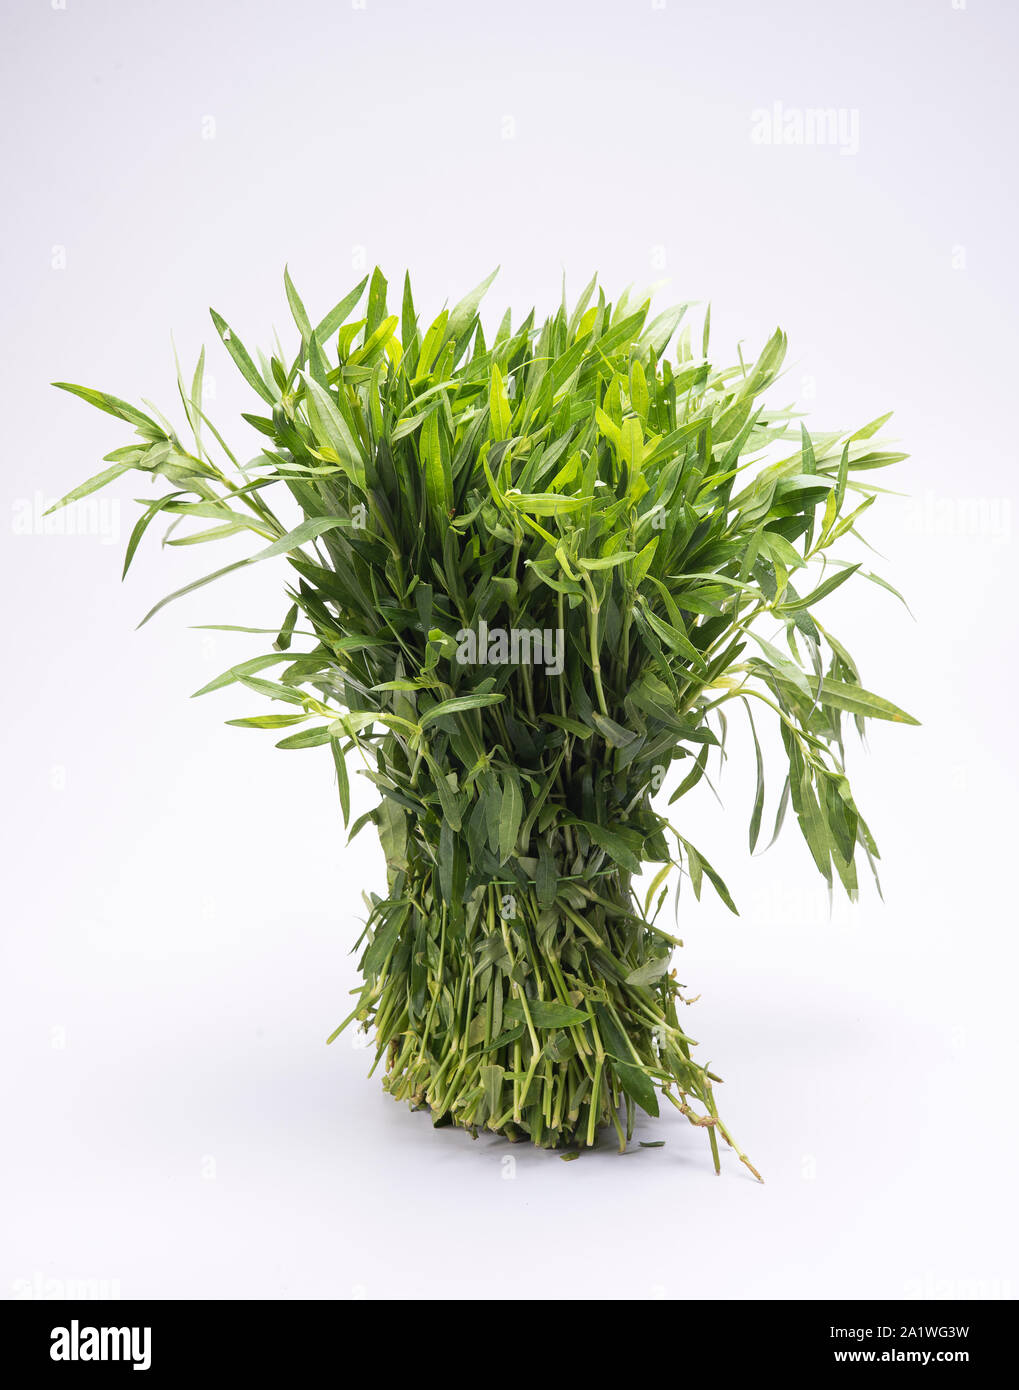 A bunch of Alternanthera sessilis, an aquatic plant used as a vegetable in Asian countries. Stock Photo